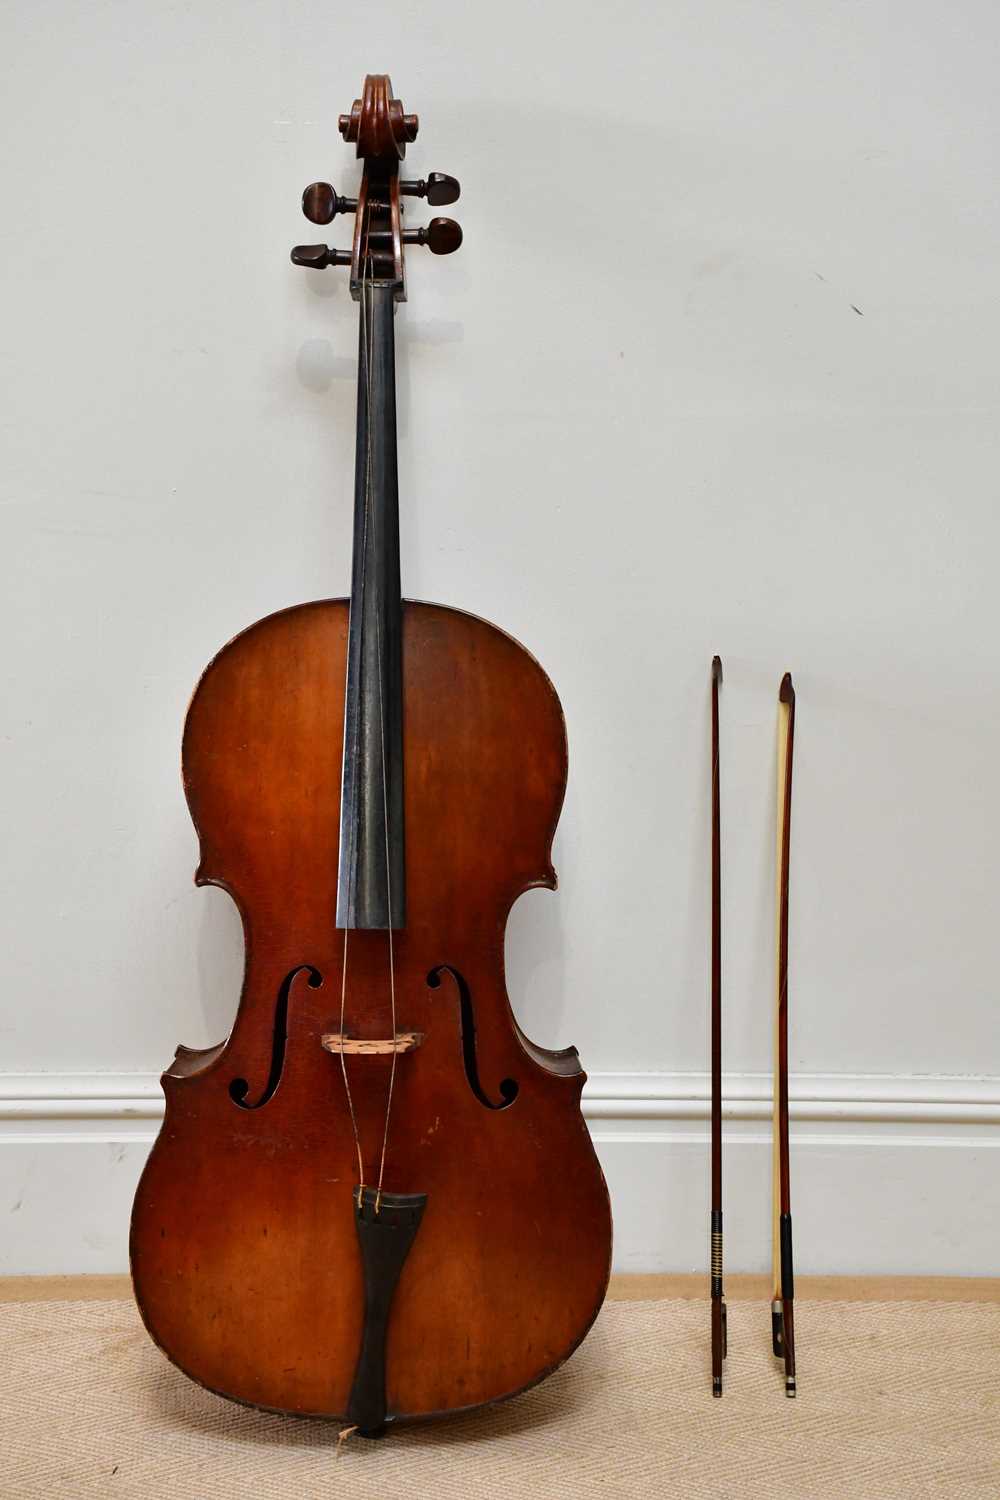 A full size German violoncello with two-piece back, length 75cm, unlabelled, with a silver mounted